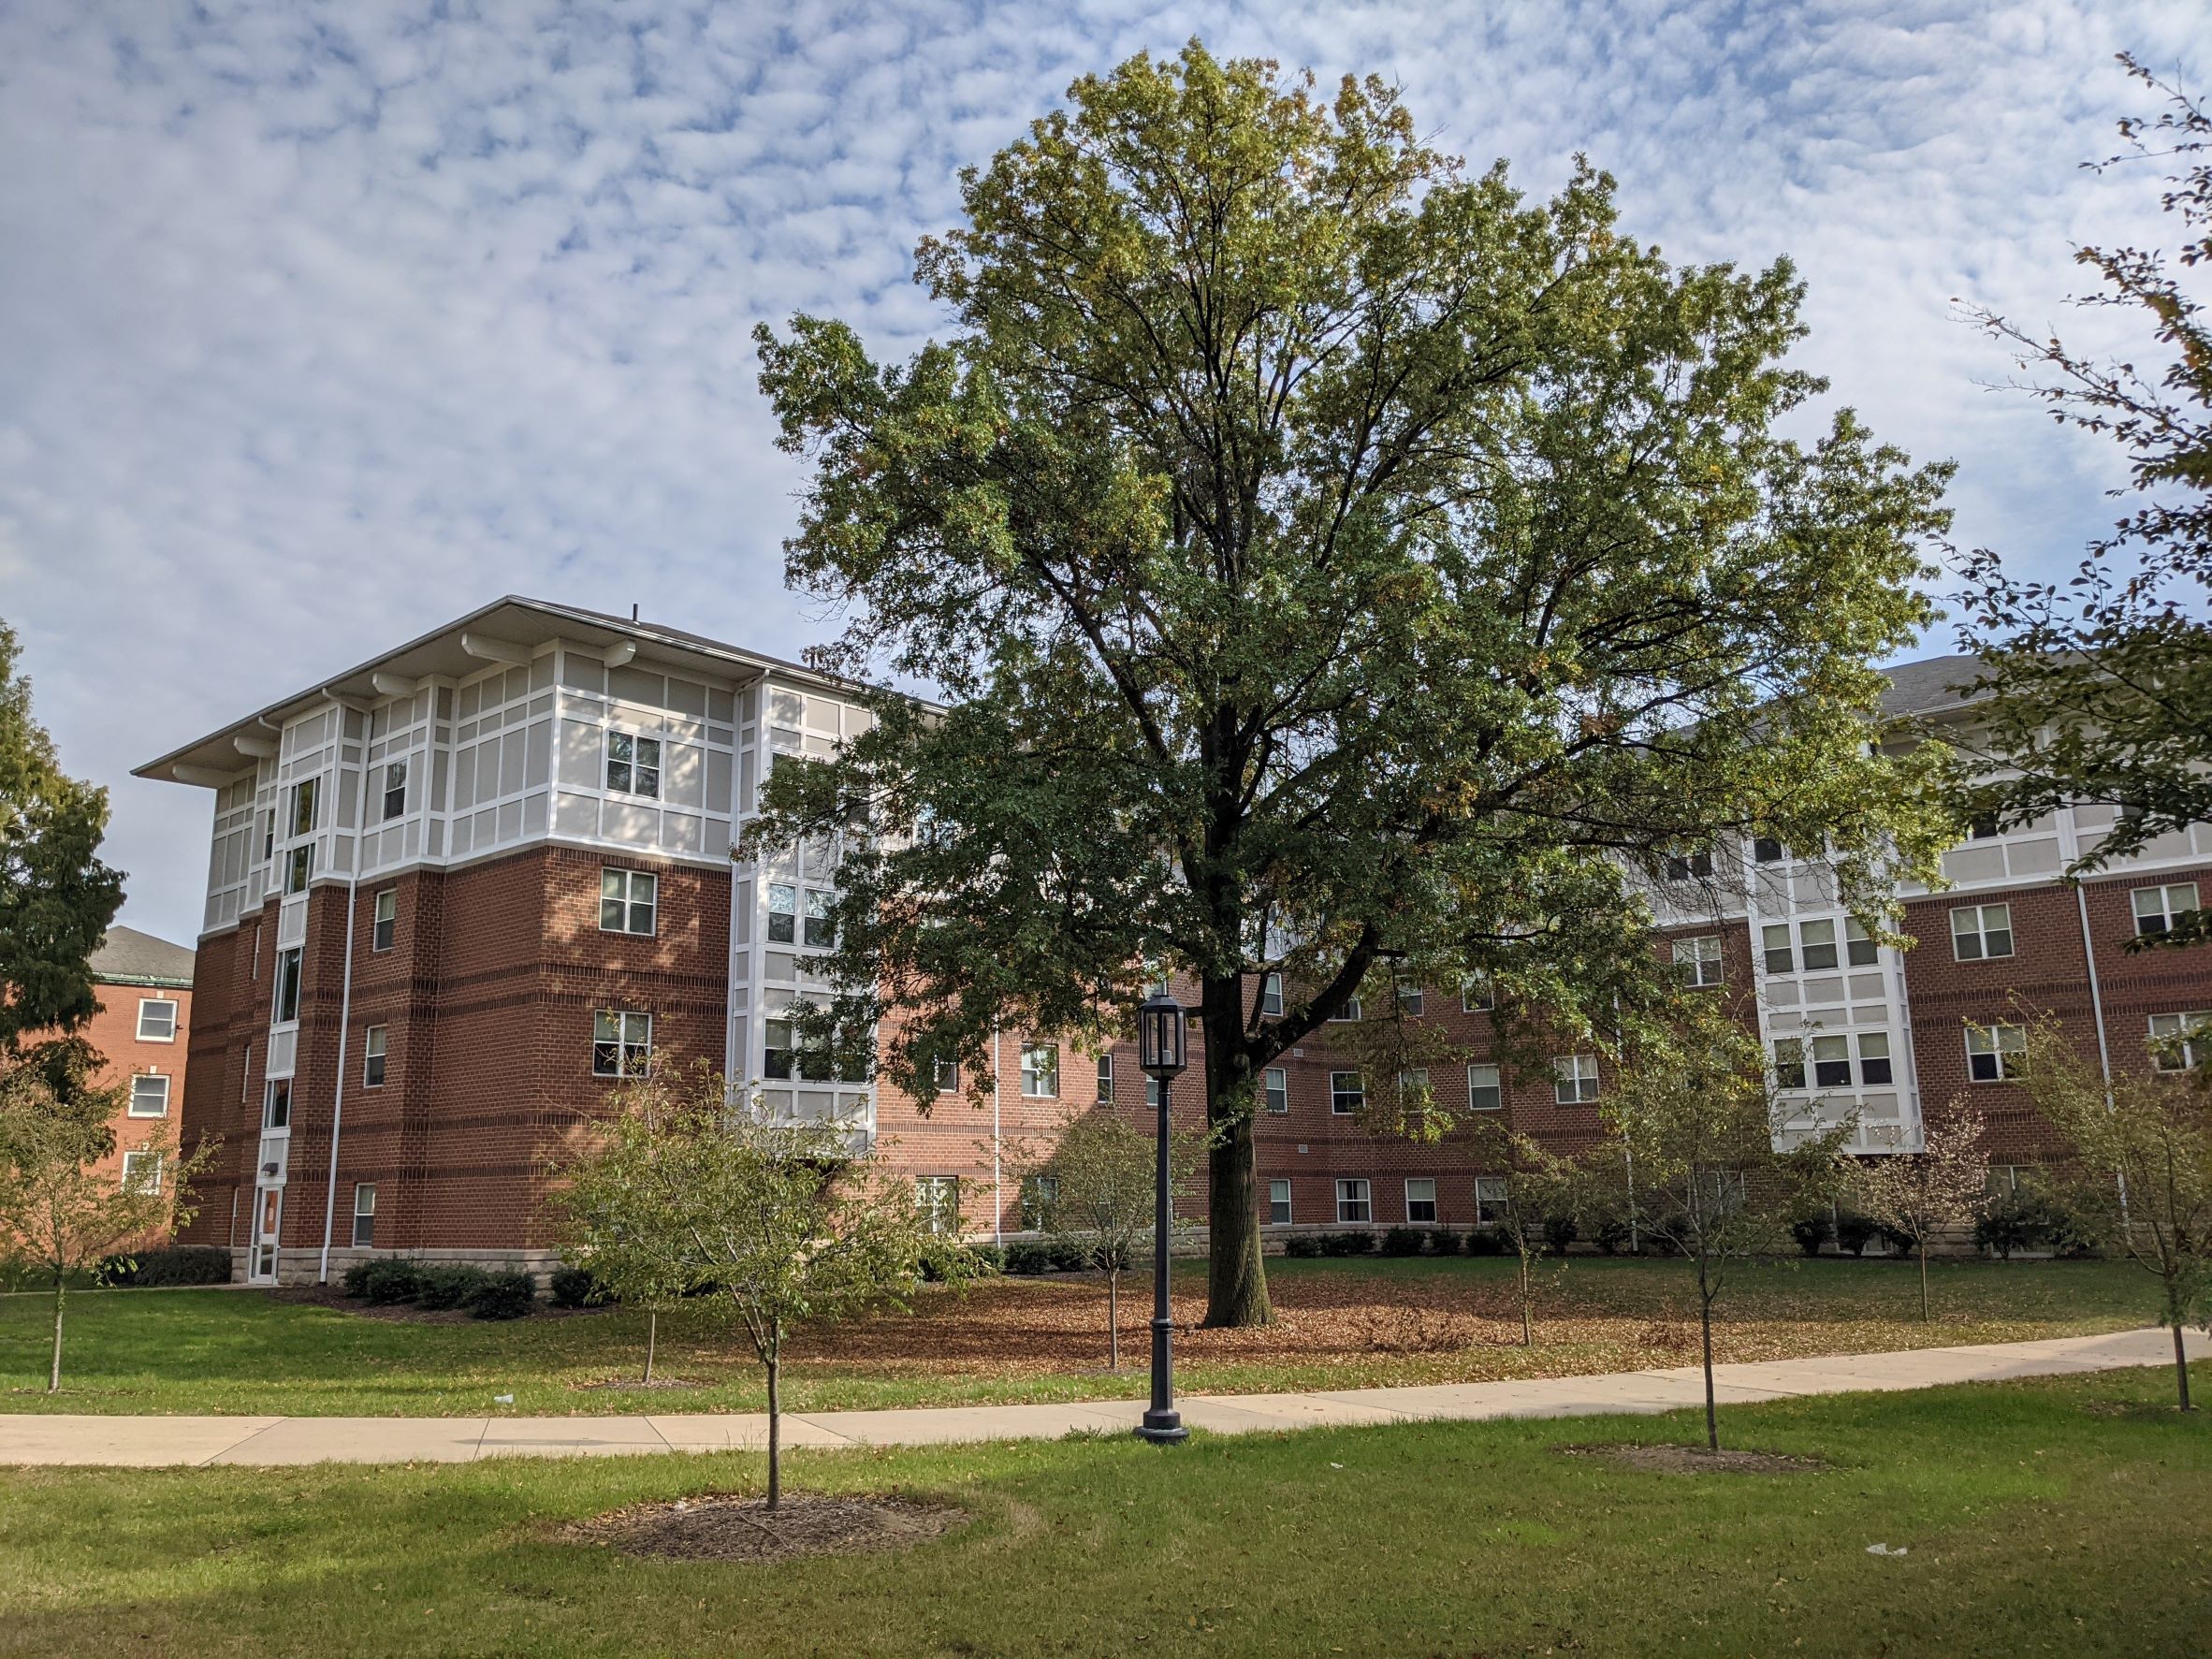 Arts & Crafts style living learning student housing community dormitory building with pink brick and white board and batten Tudor style trim and deep overhangs, large American Elm tree in foreground of courtyard with building wrapping around the tree